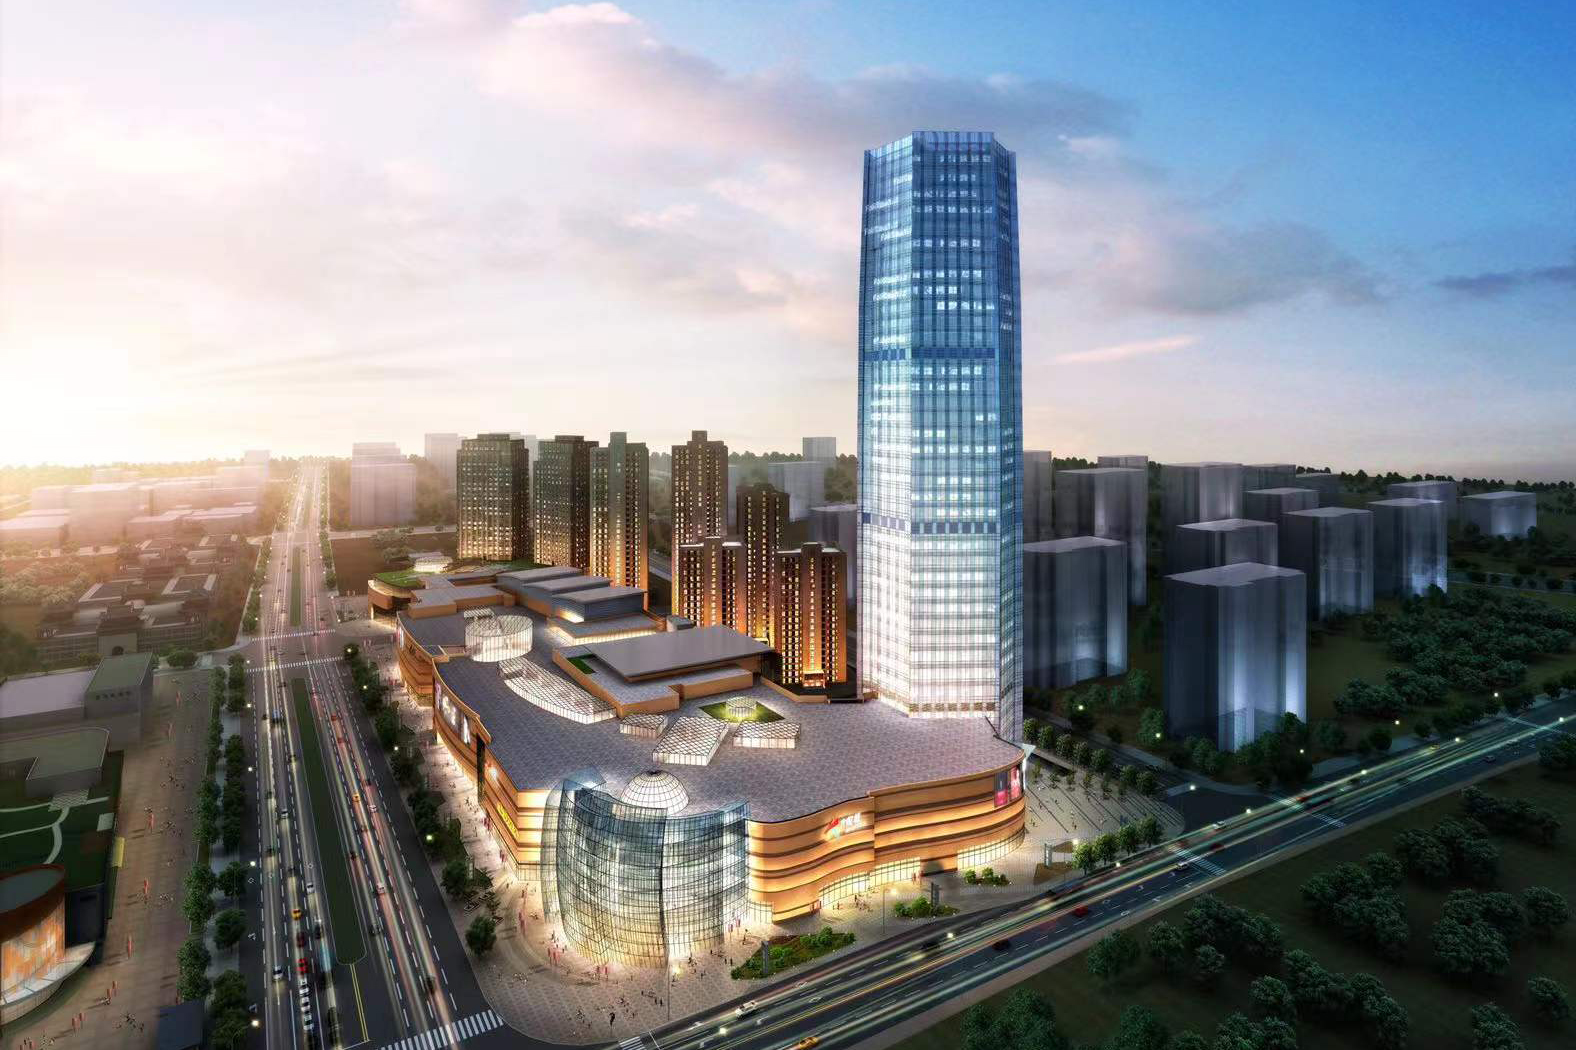 The acquisition of Tianjin MingXuan technology development Ltd. With 100% shares, which is the quality assets and brings a stable profit for MK, optimizes the assets and business of MK and increase the continuous profitability.